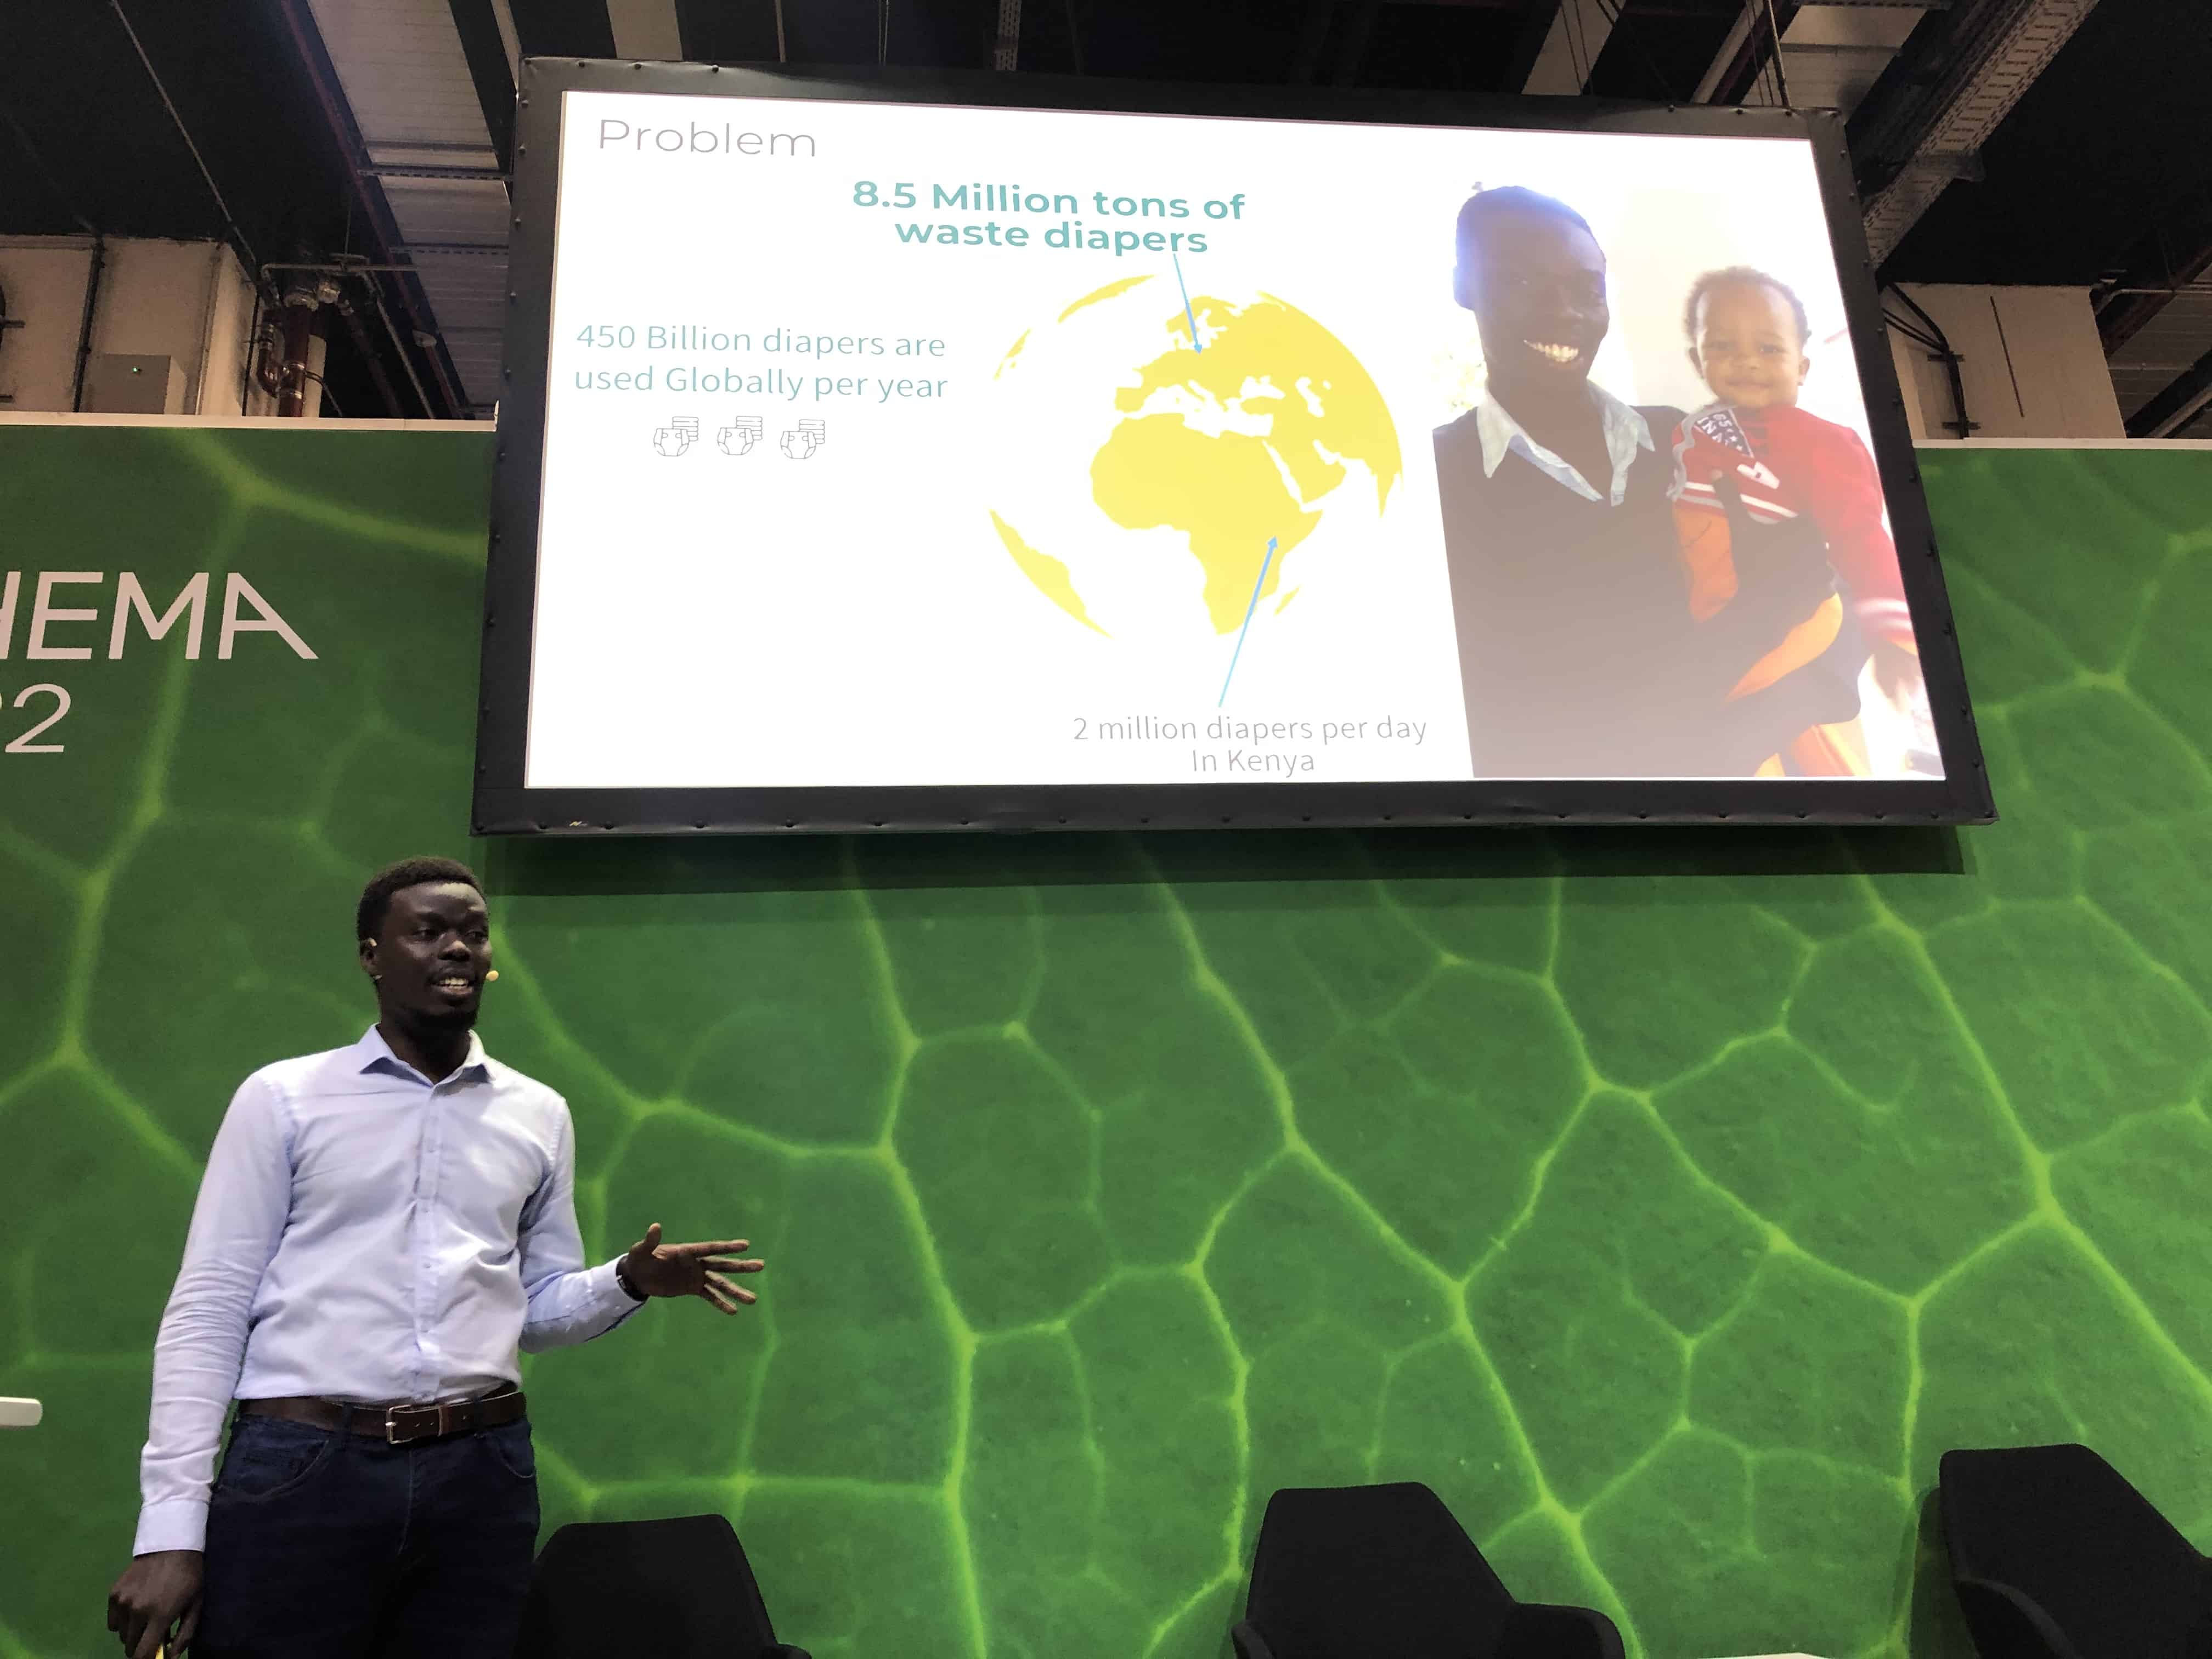 With Alkyl, Melvin Kizito wants to offer a solution for diaper waste